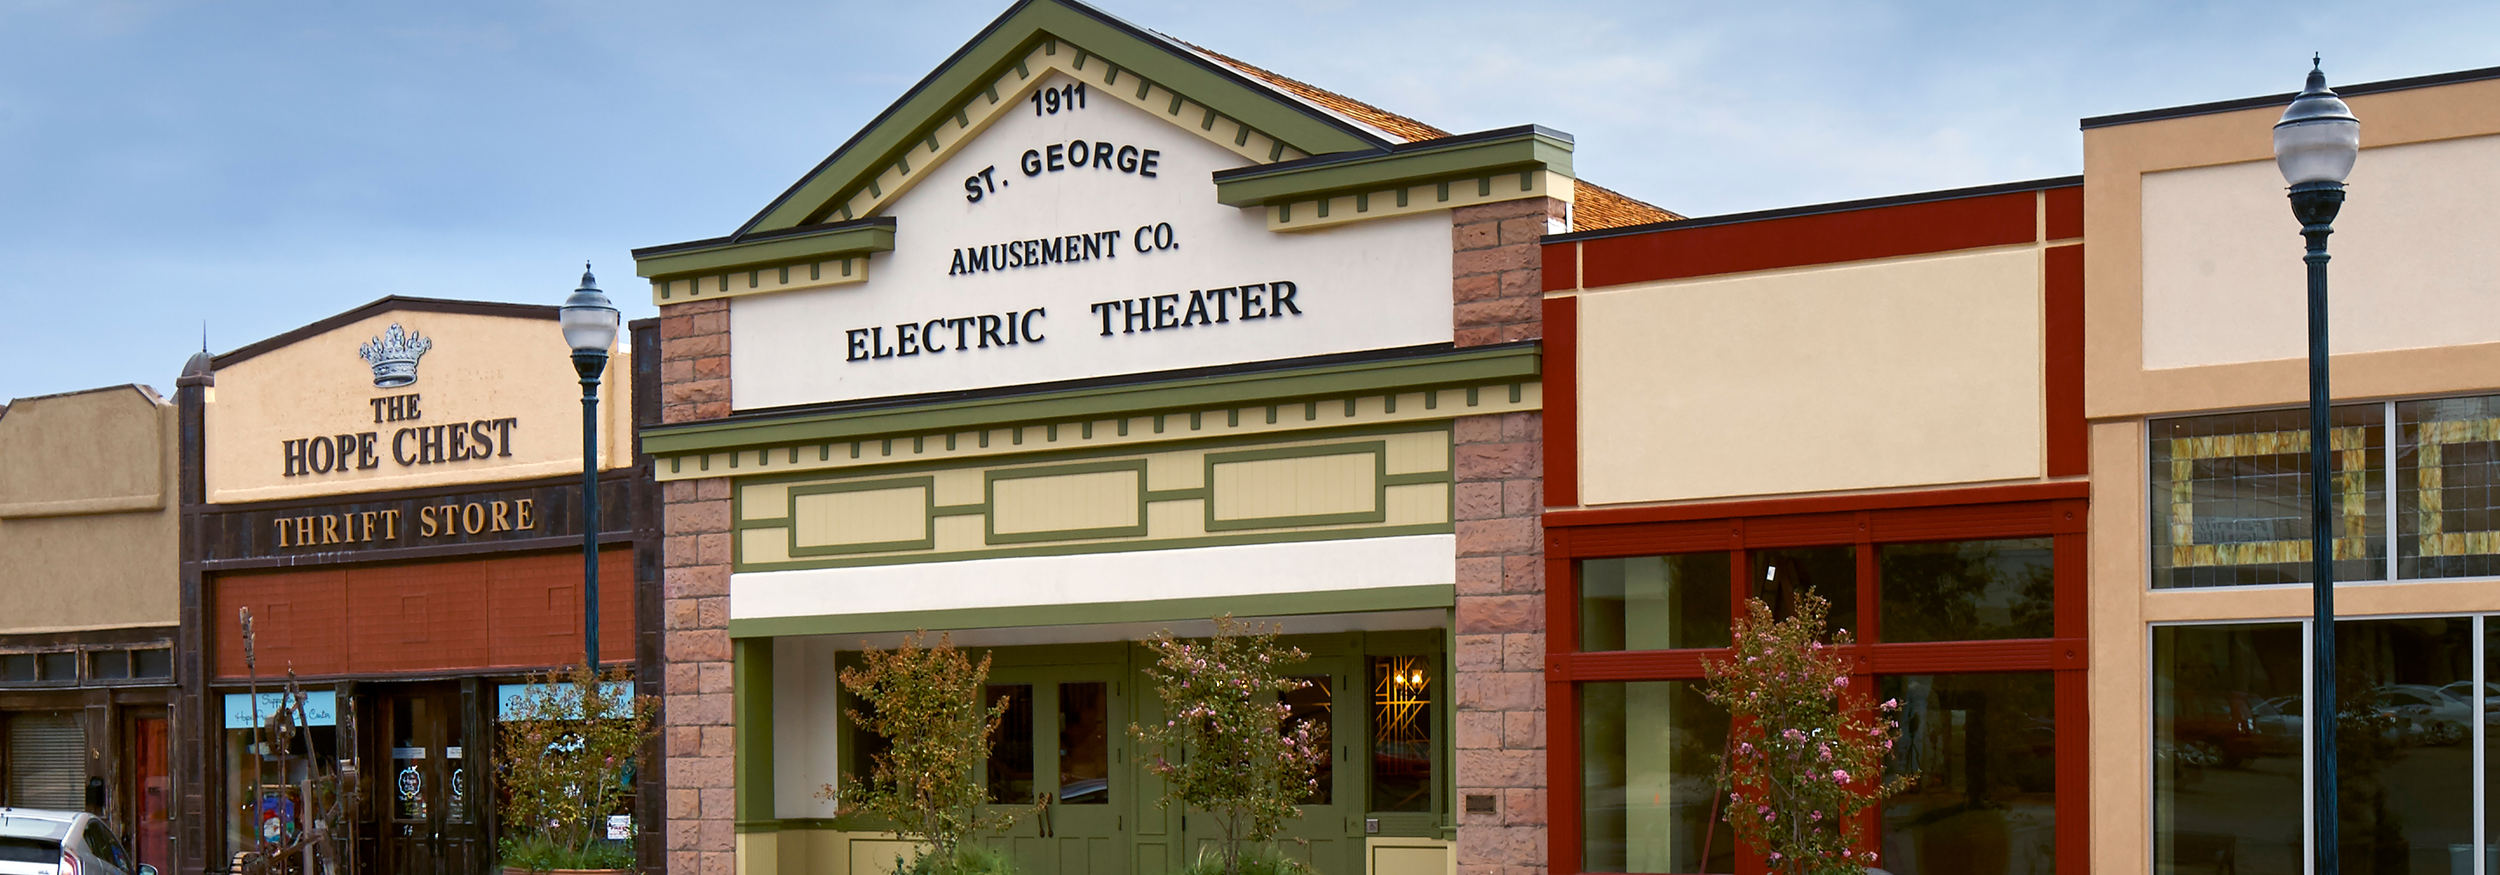 Electric Theater